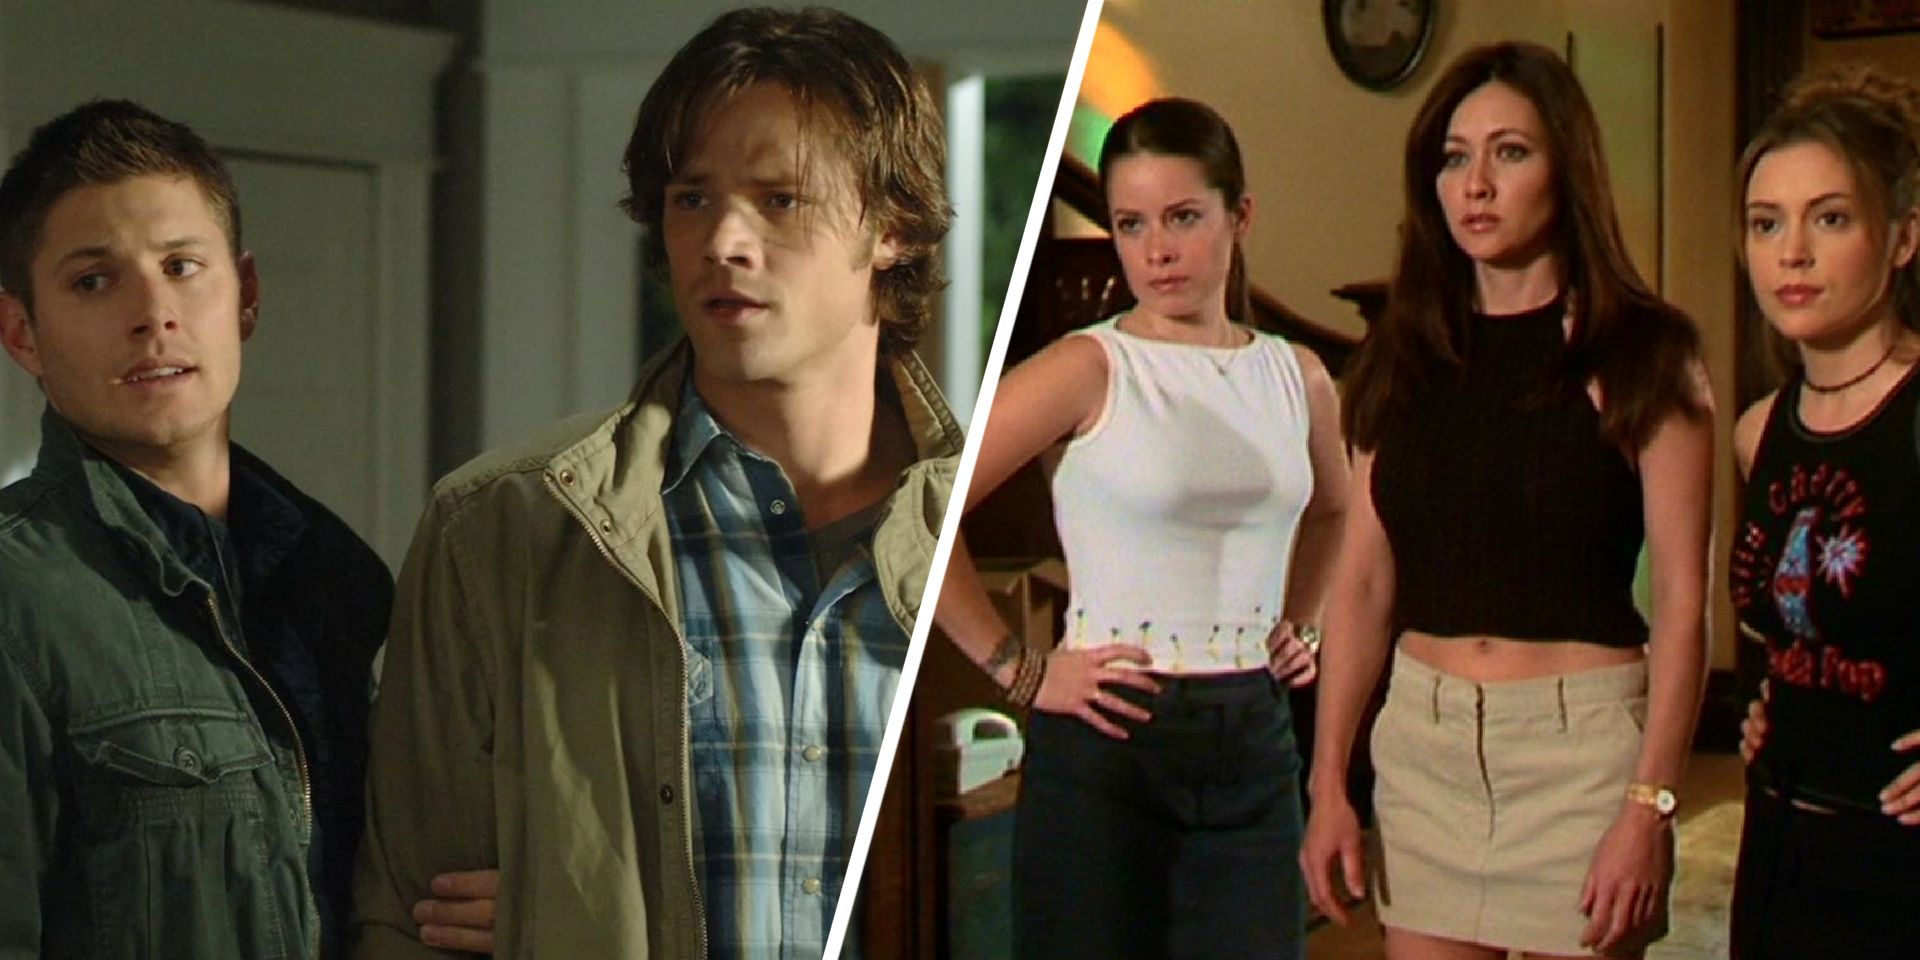 Sam and Dean from Supernatural and The Charmed ones from Charmed face enemies